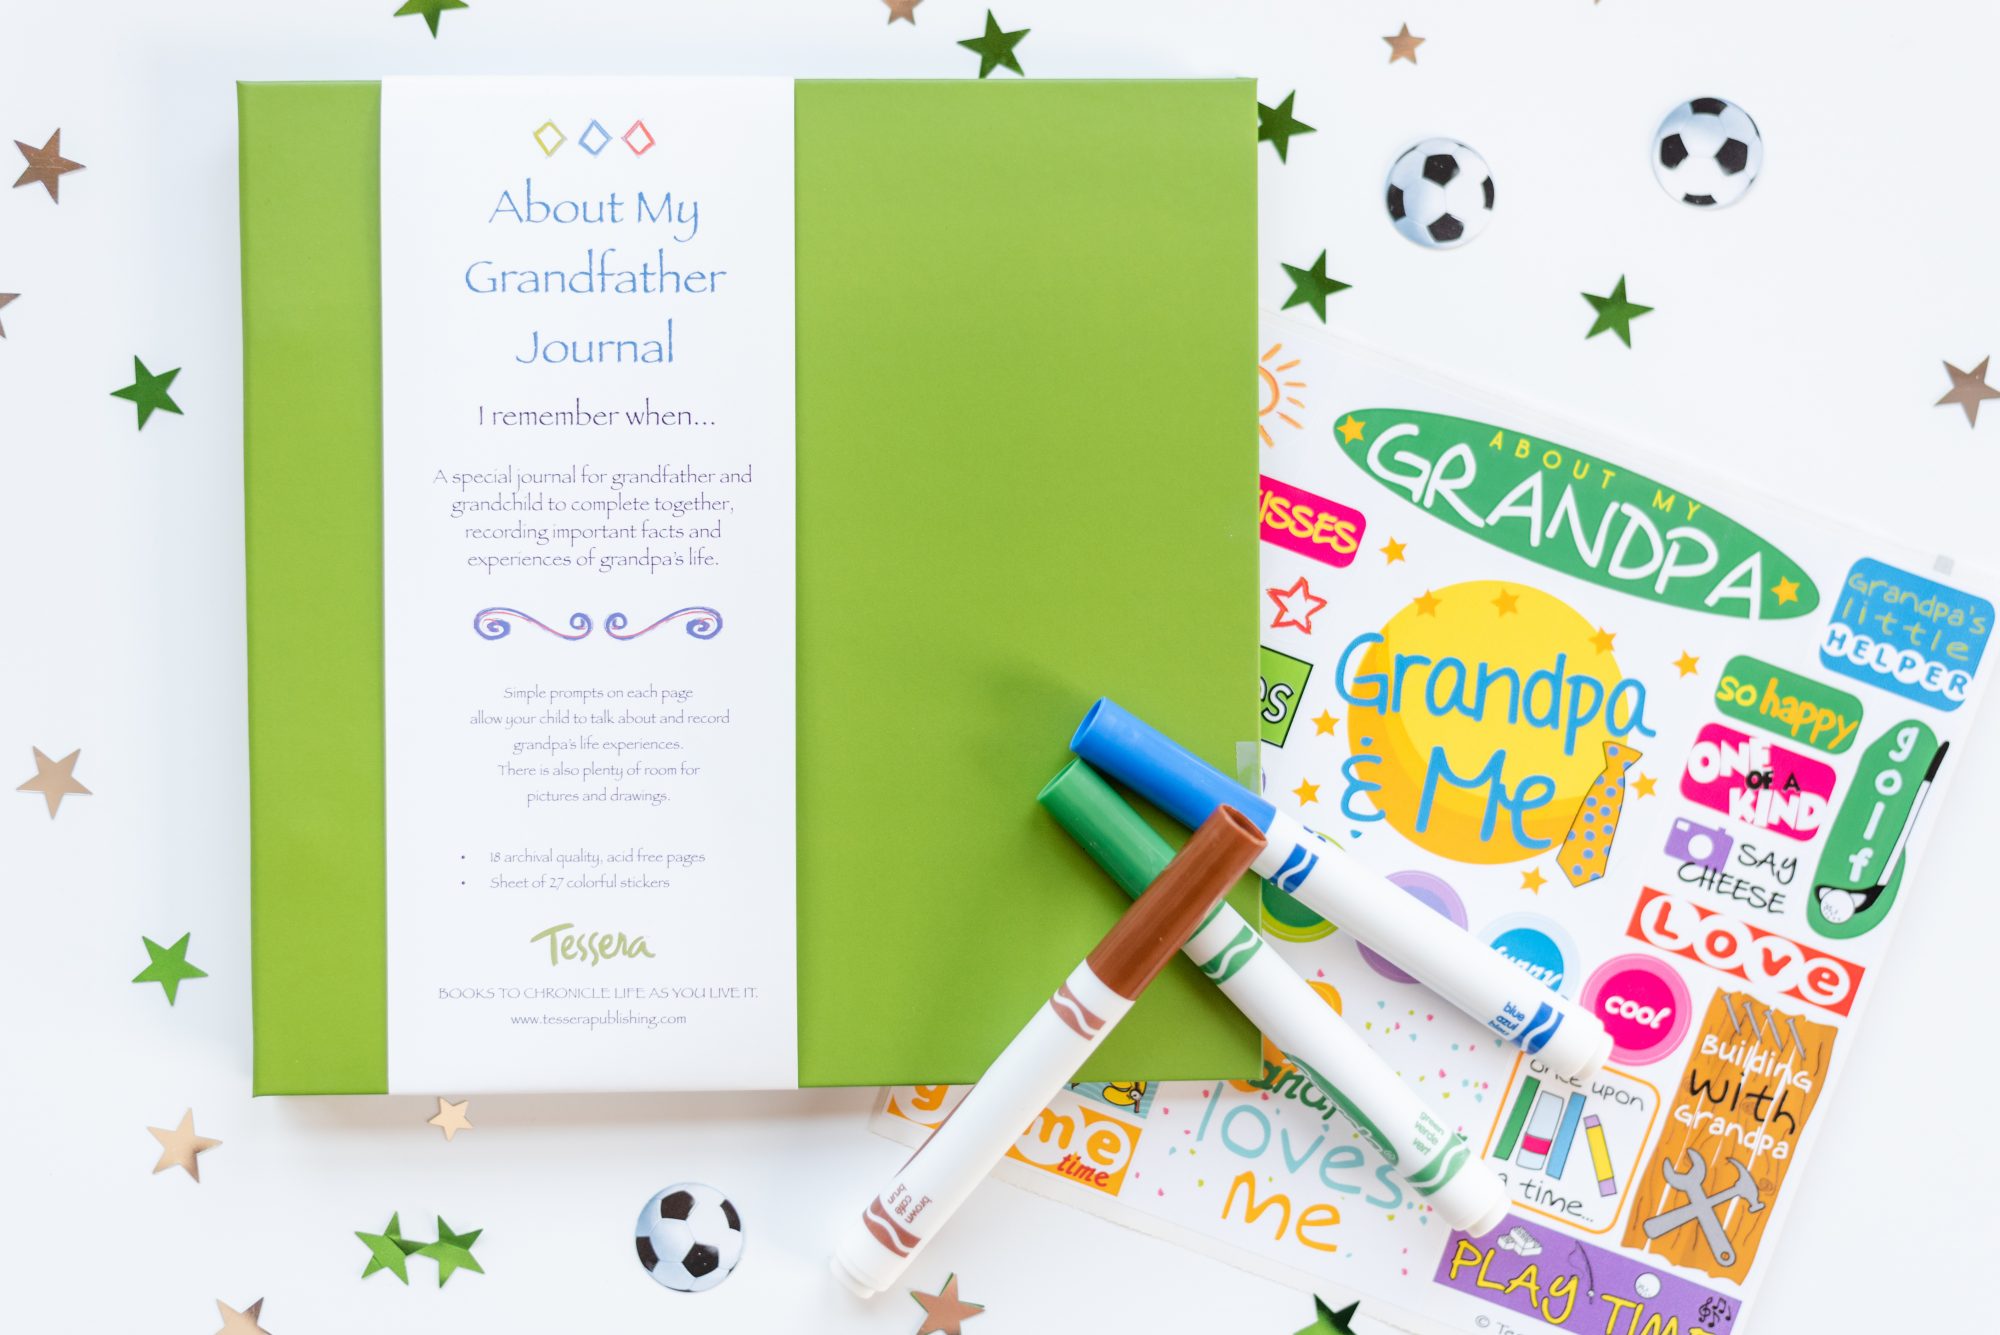 Green about my grandfather kids journal with sticker sheet and props